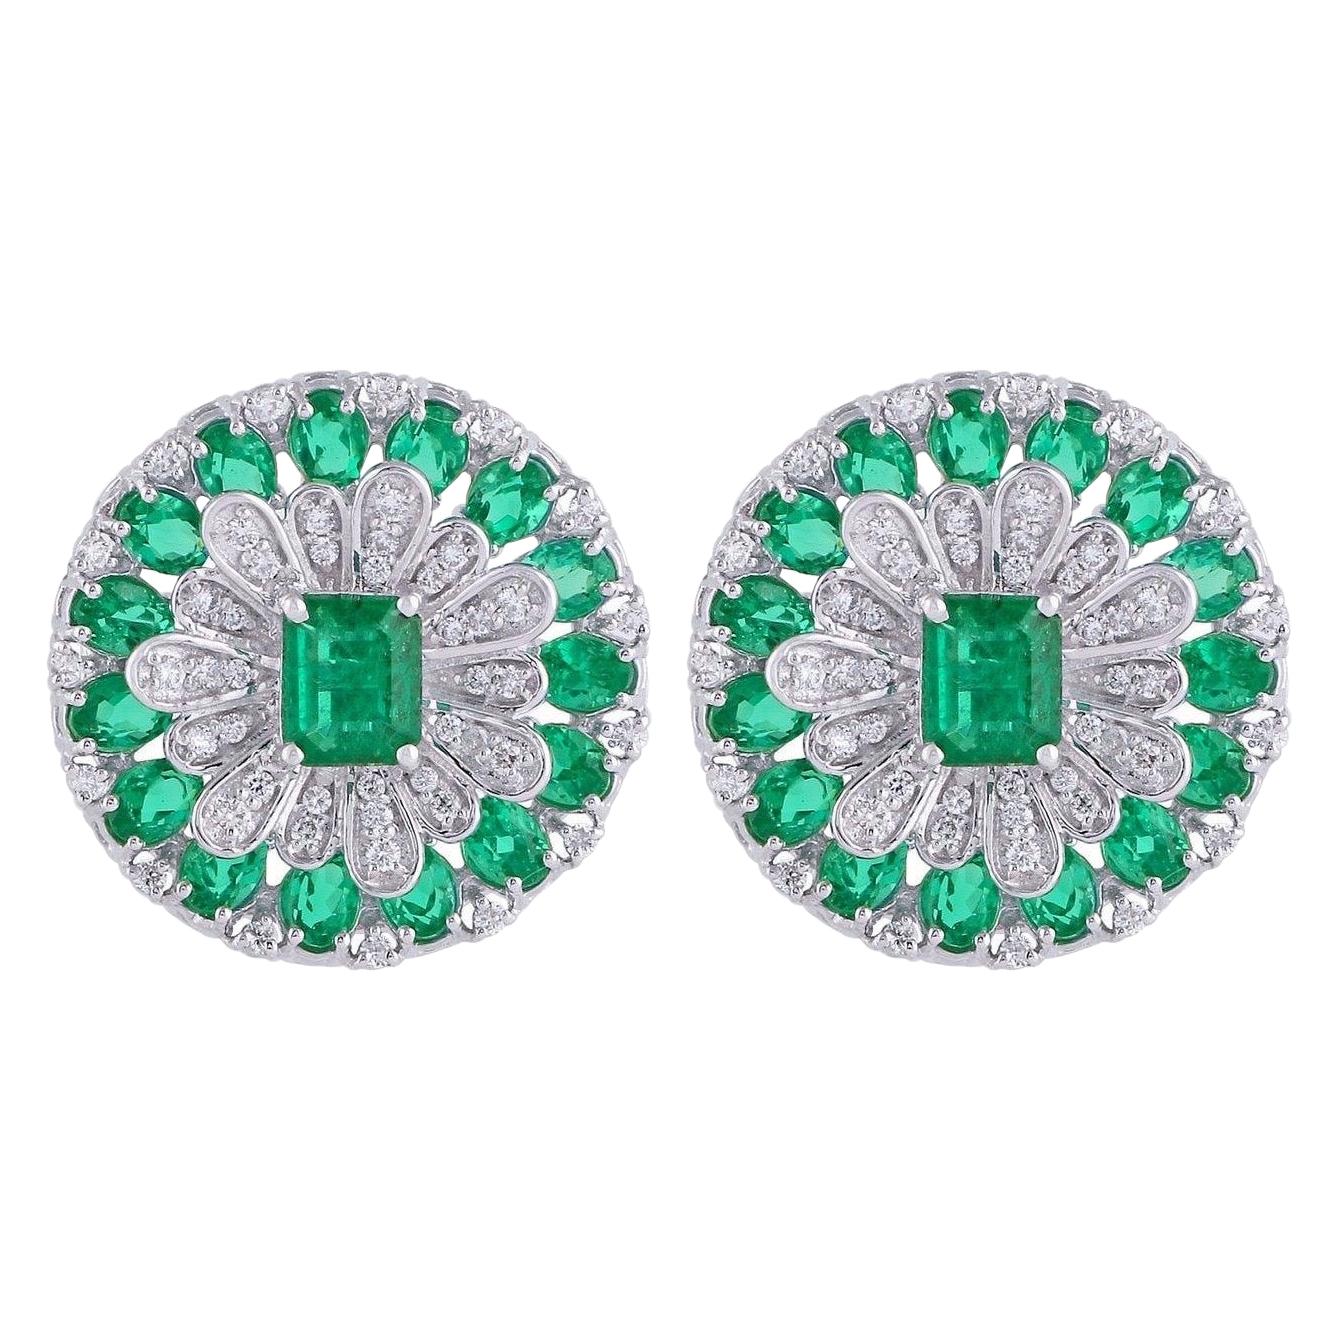 New Boxed Ladies 9ct White Gold Emerald Flower Studs Earrings 7mm Hallmarked 